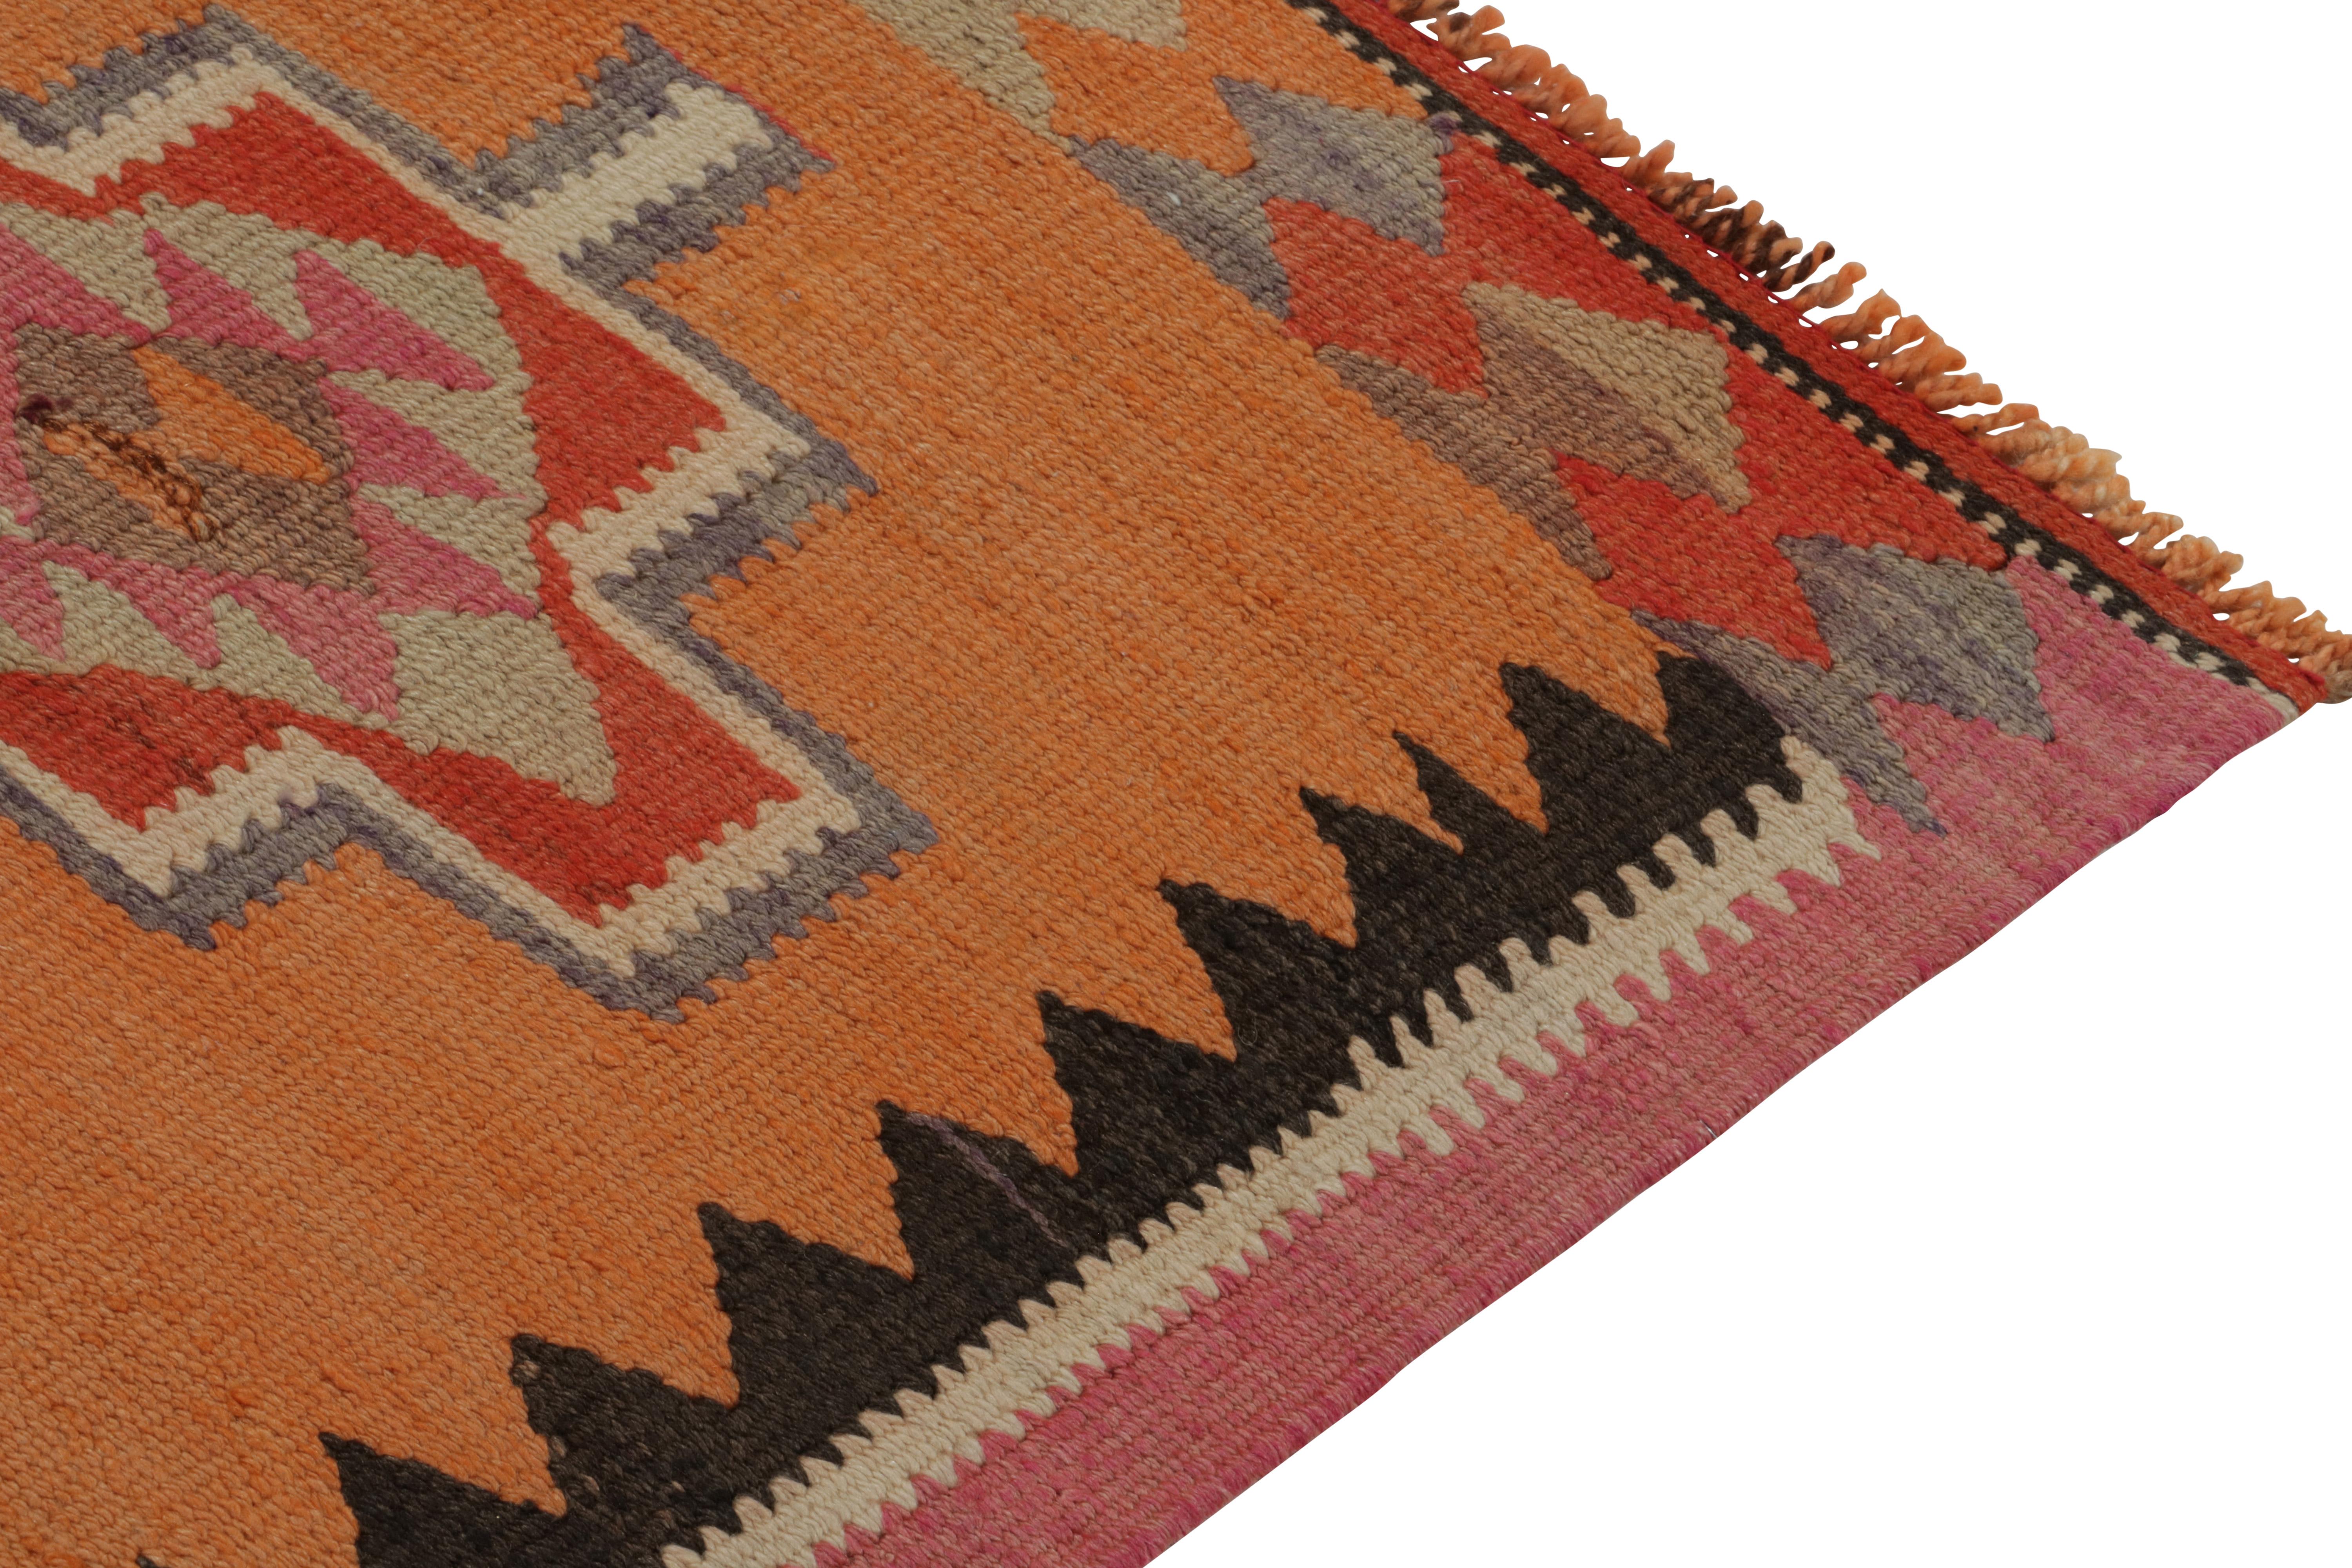 Vintage Kilim Runner in Orange with Red & Beige-Brown Tribal by Rug & Kilim In Good Condition For Sale In Long Island City, NY